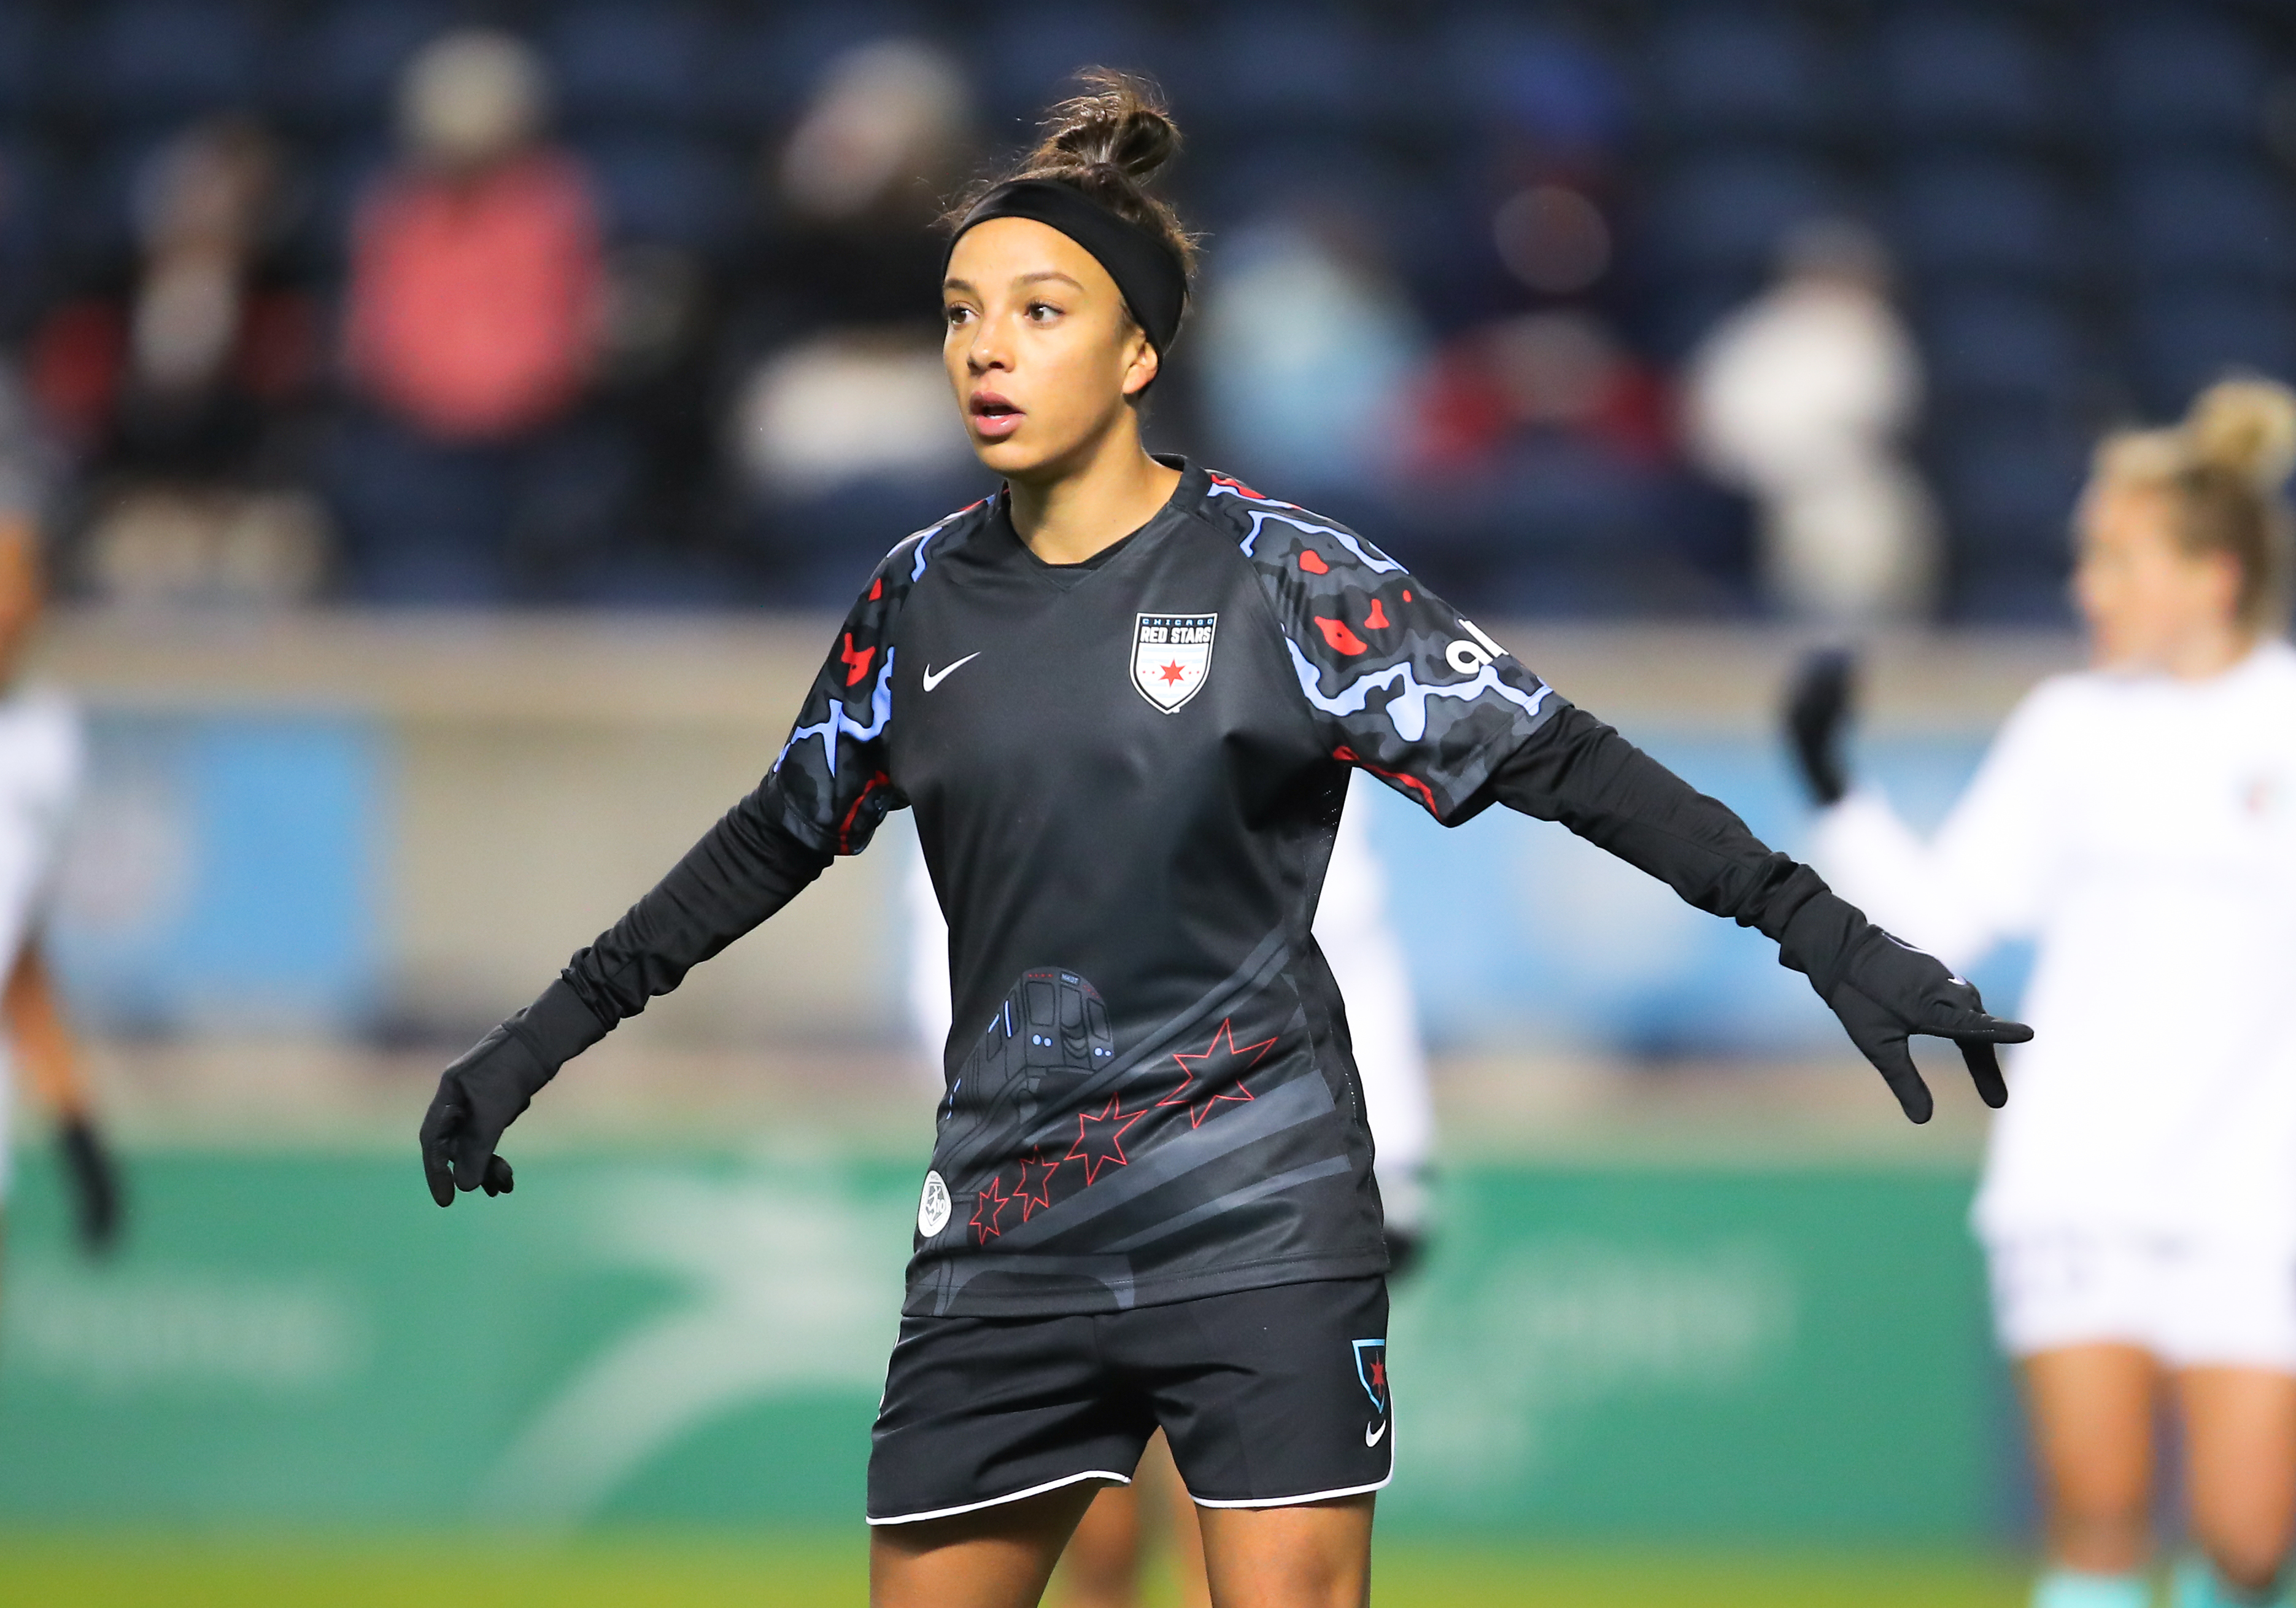 SOCCER: MAR 25 NWSL Challenge Cup - Kansas City Current at Chicago Red Stars